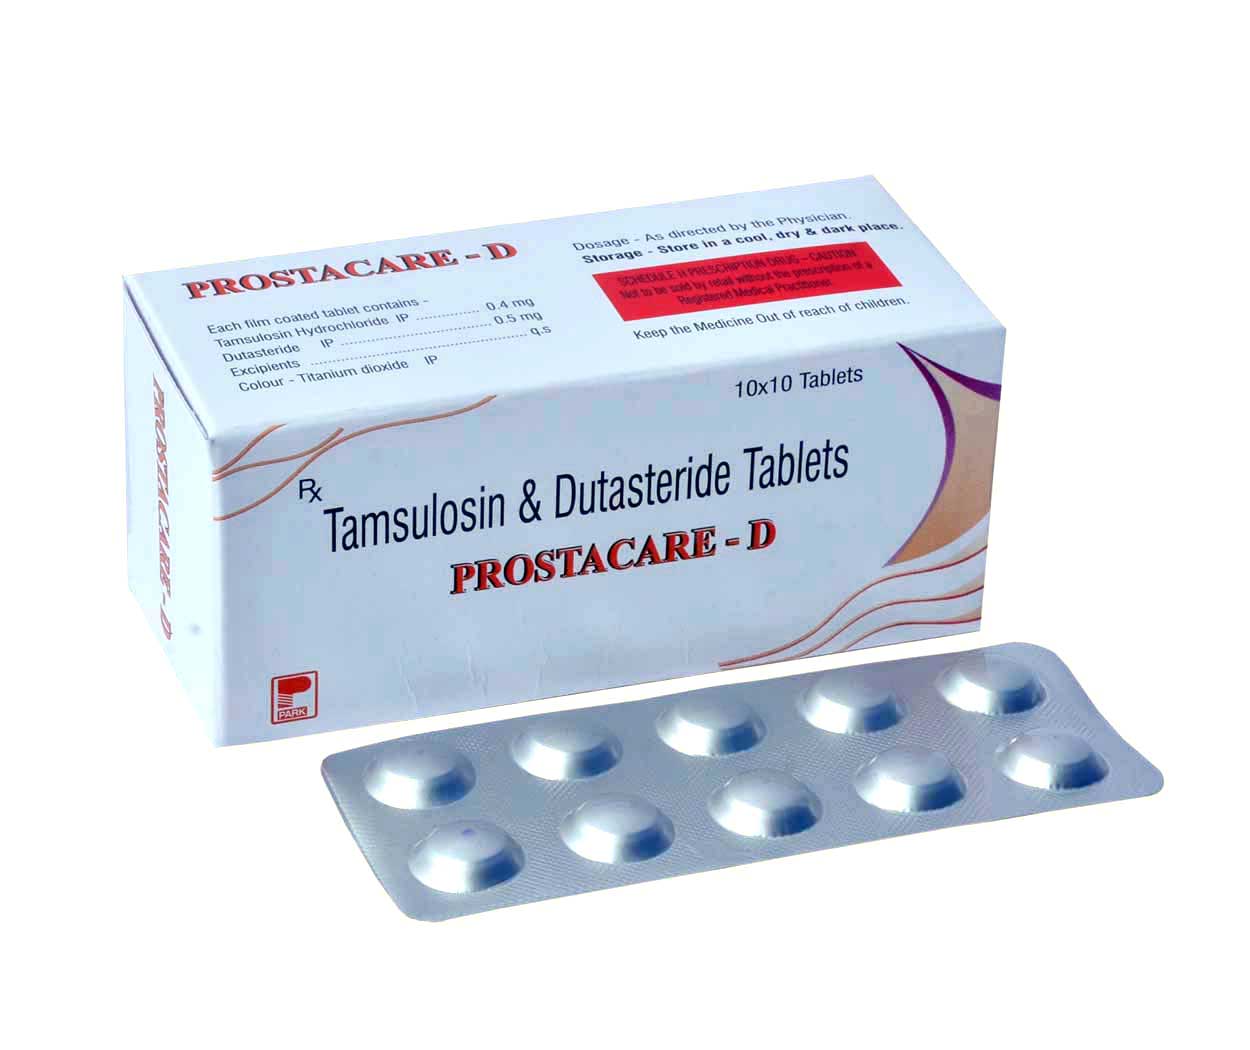 Product Name: PROSTACARE D, Compositions of PROSTACARE D are Tamsulosin & Dutasteride Tablets - Park Pharmaceuticals